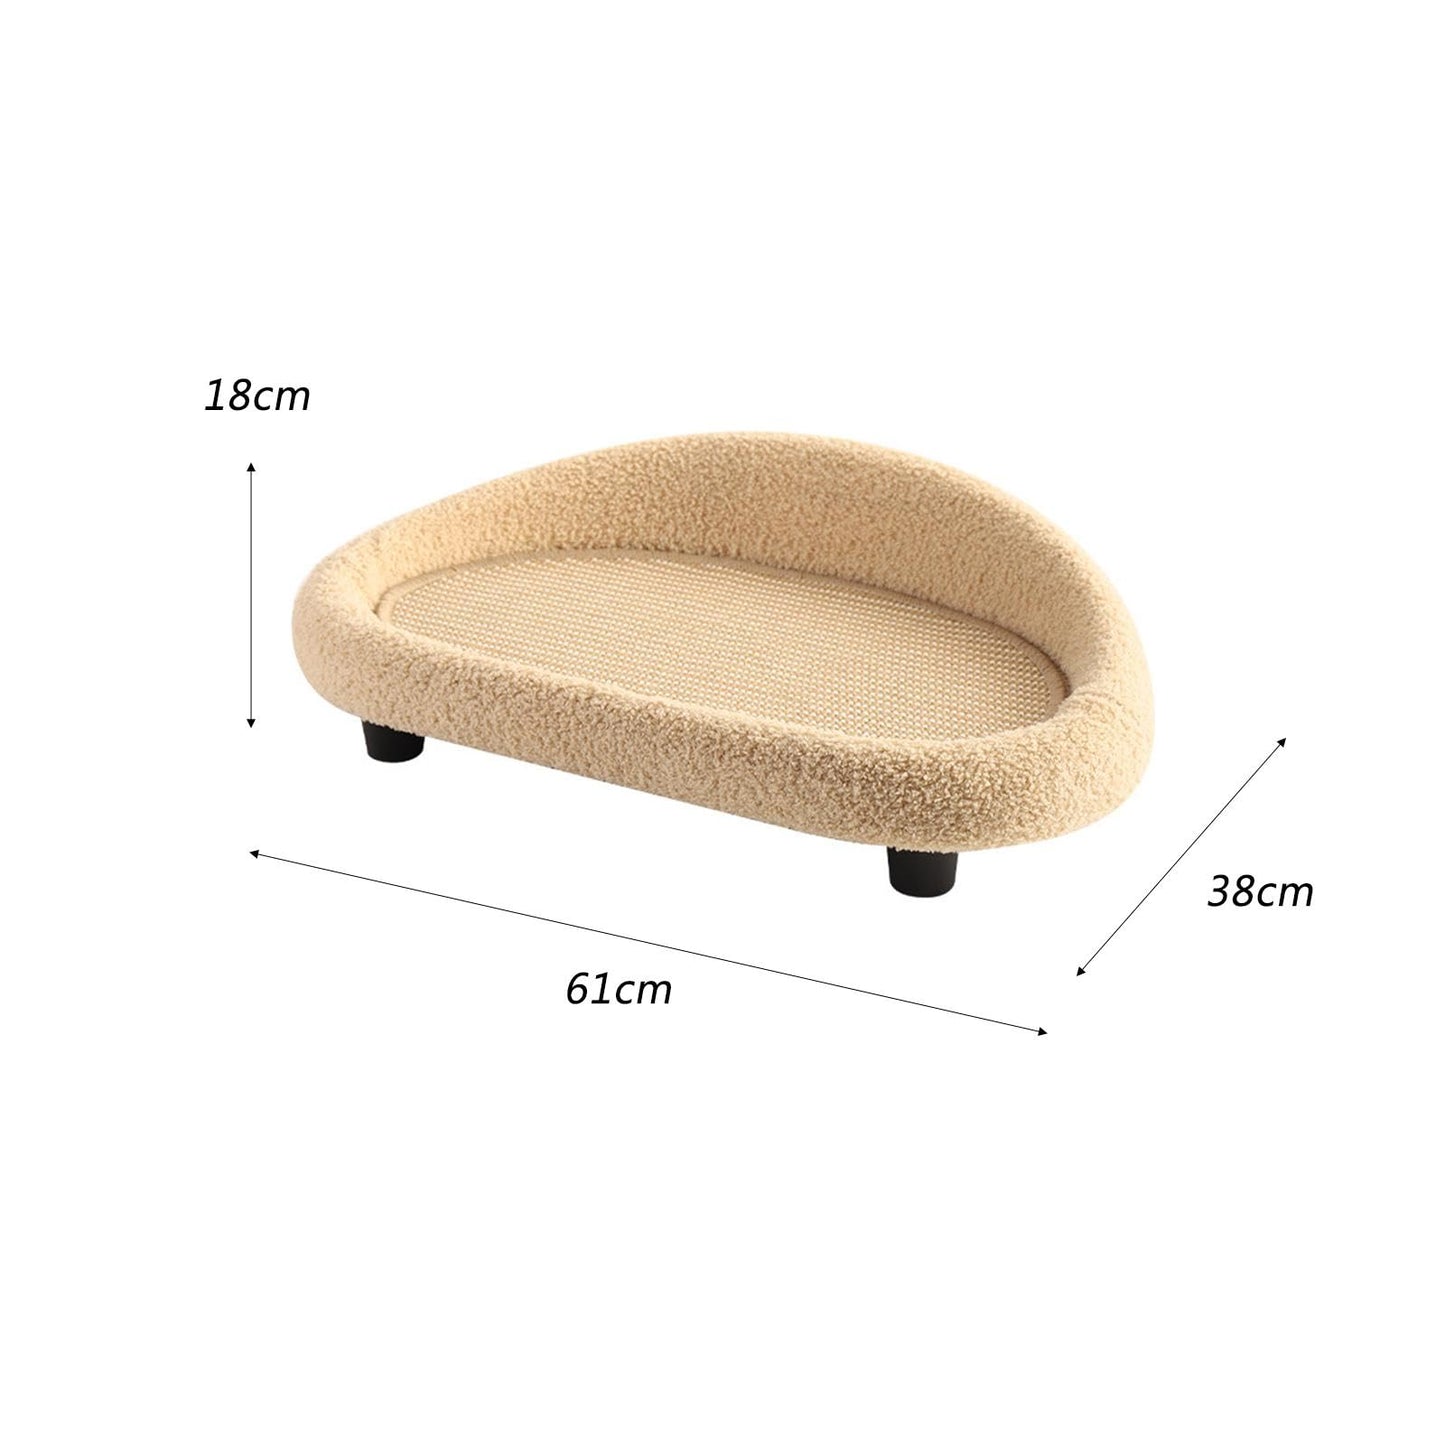 Cat Sisal Scratcher Couch Bed